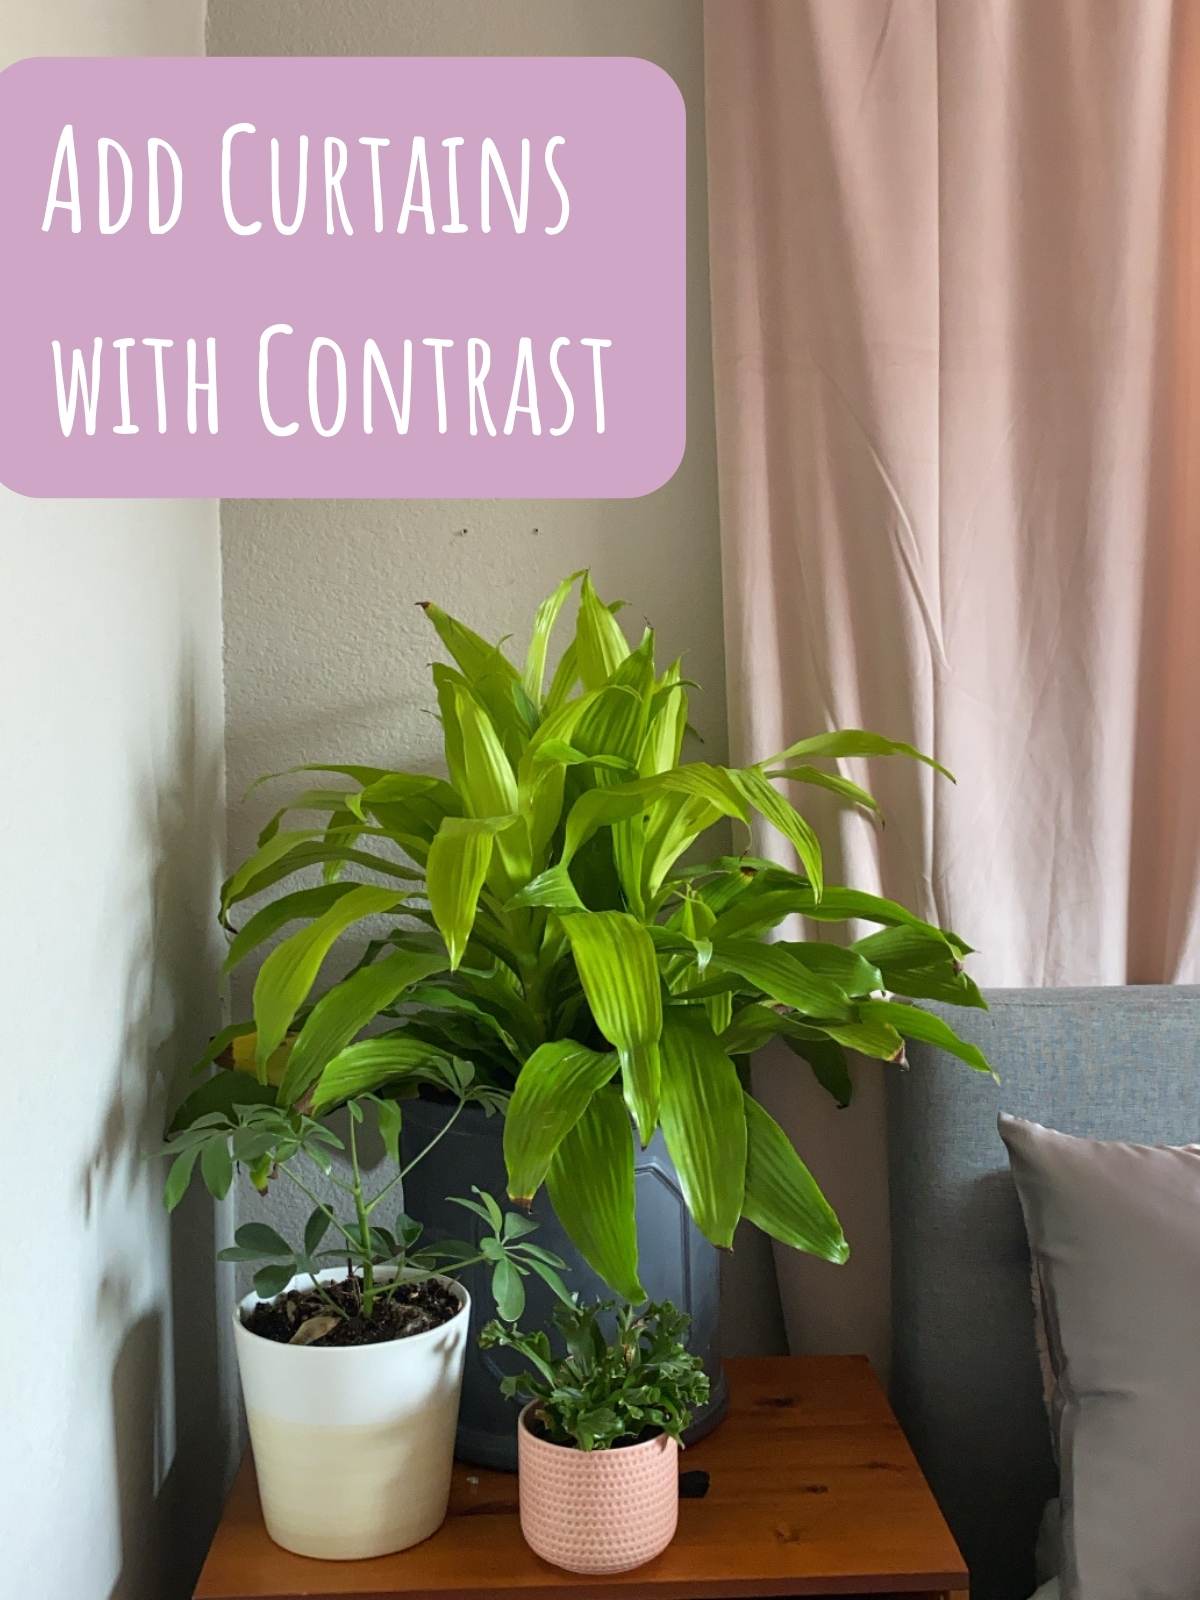 Add Curtains with Contrast